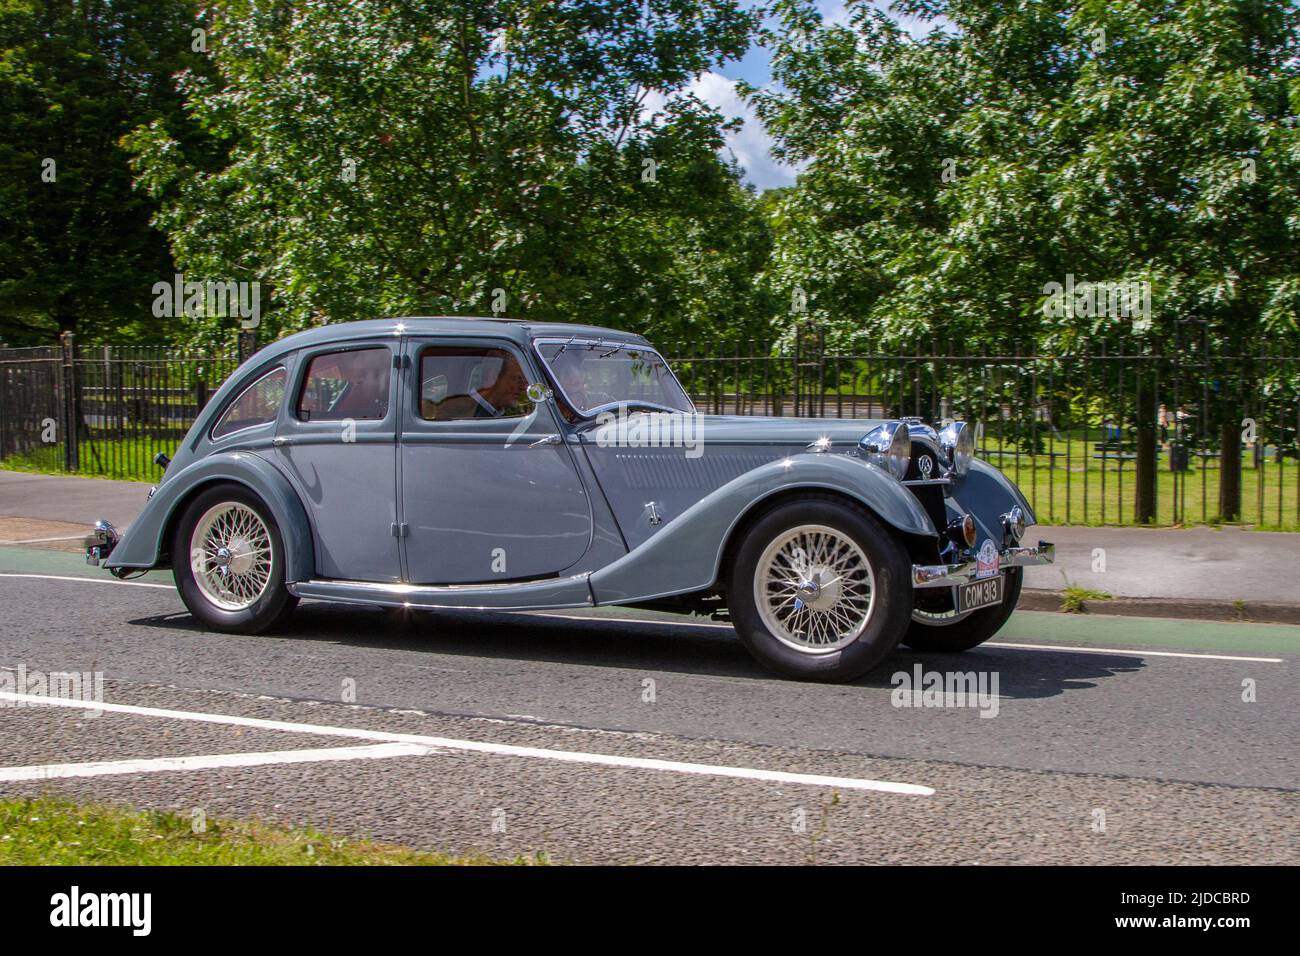 1936 30s thirties pre-war grey Riley Kestrel Sprite 1496cc petrol saloon; automobiles featured during the 58th year of the Manchester to Blackpool Touring Assembly for Veteran, Vintage, Classic and Cherished cars. Stock Photo